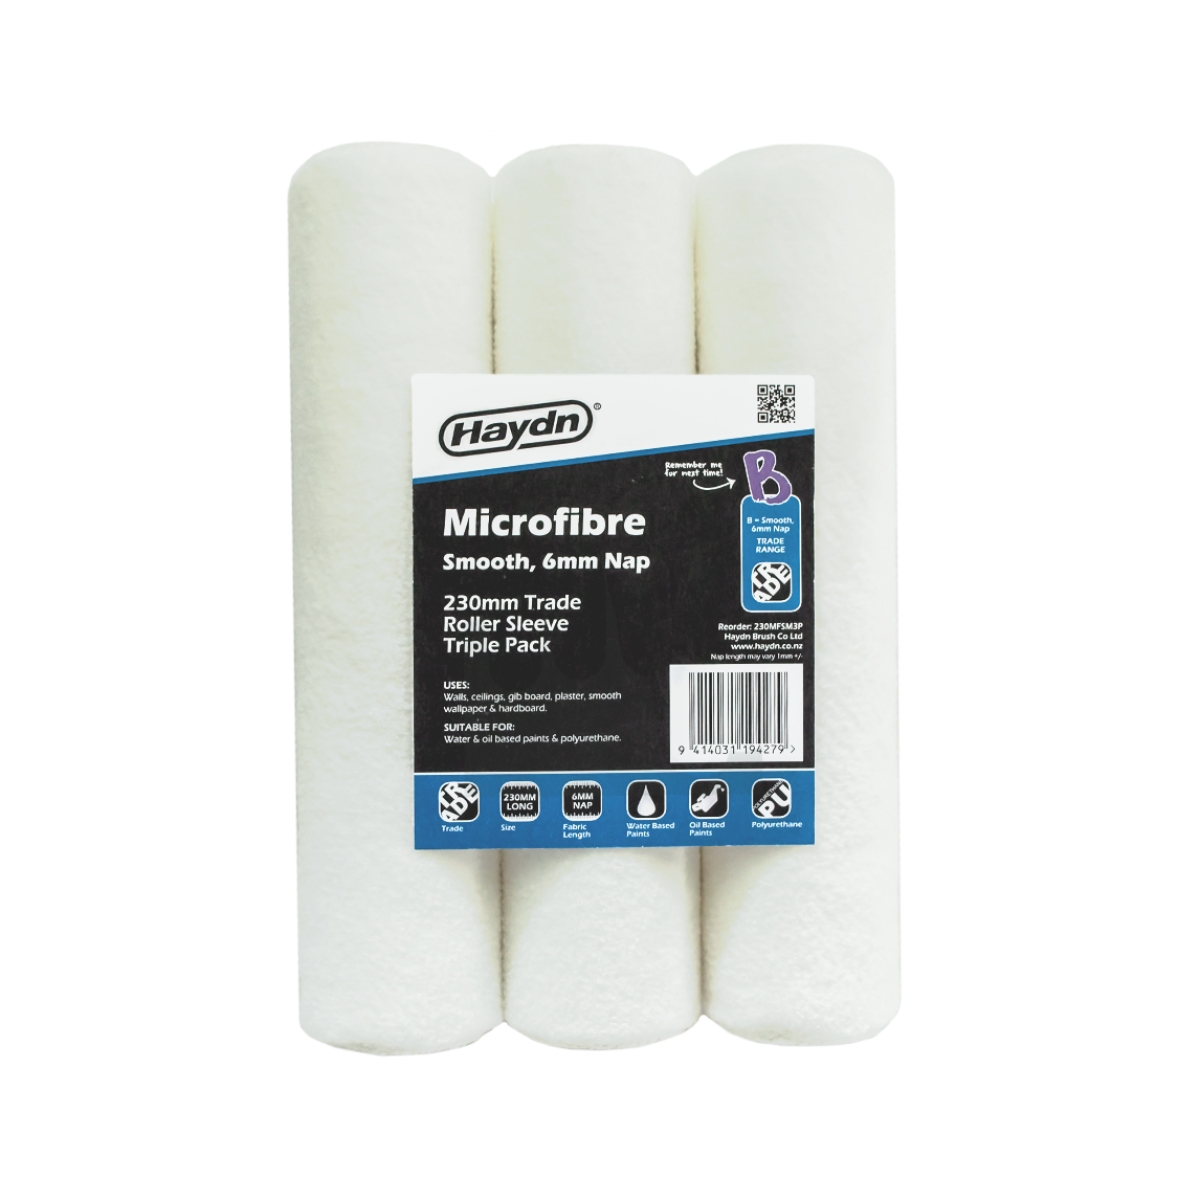 Haydn Trade Microfibre 230mm Smooth 6mm Nap Paint Roller Sleeves (3 pack)